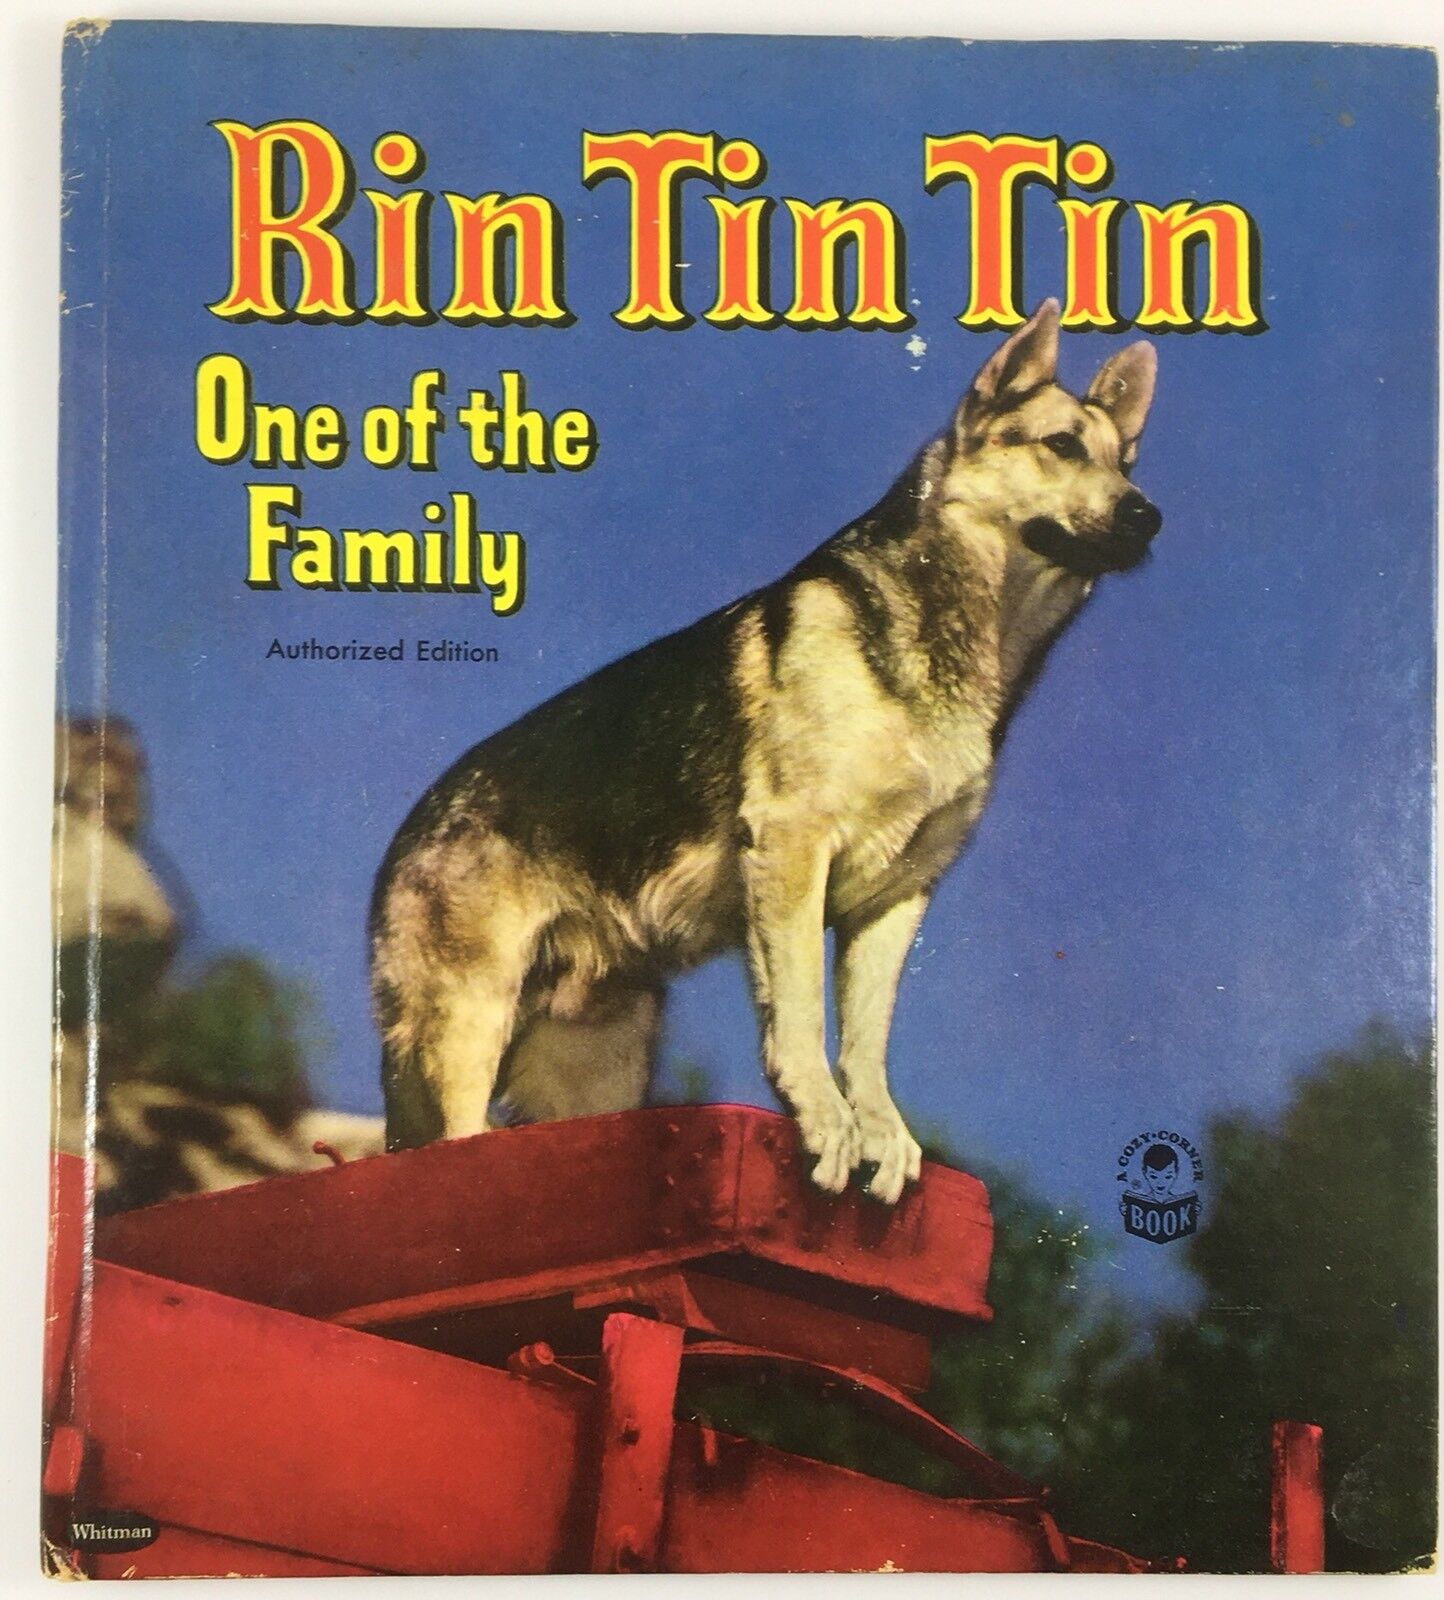 1953 Rin Tin Tin One Of The Family Dog Whitman Book Child’s Reading Colorful